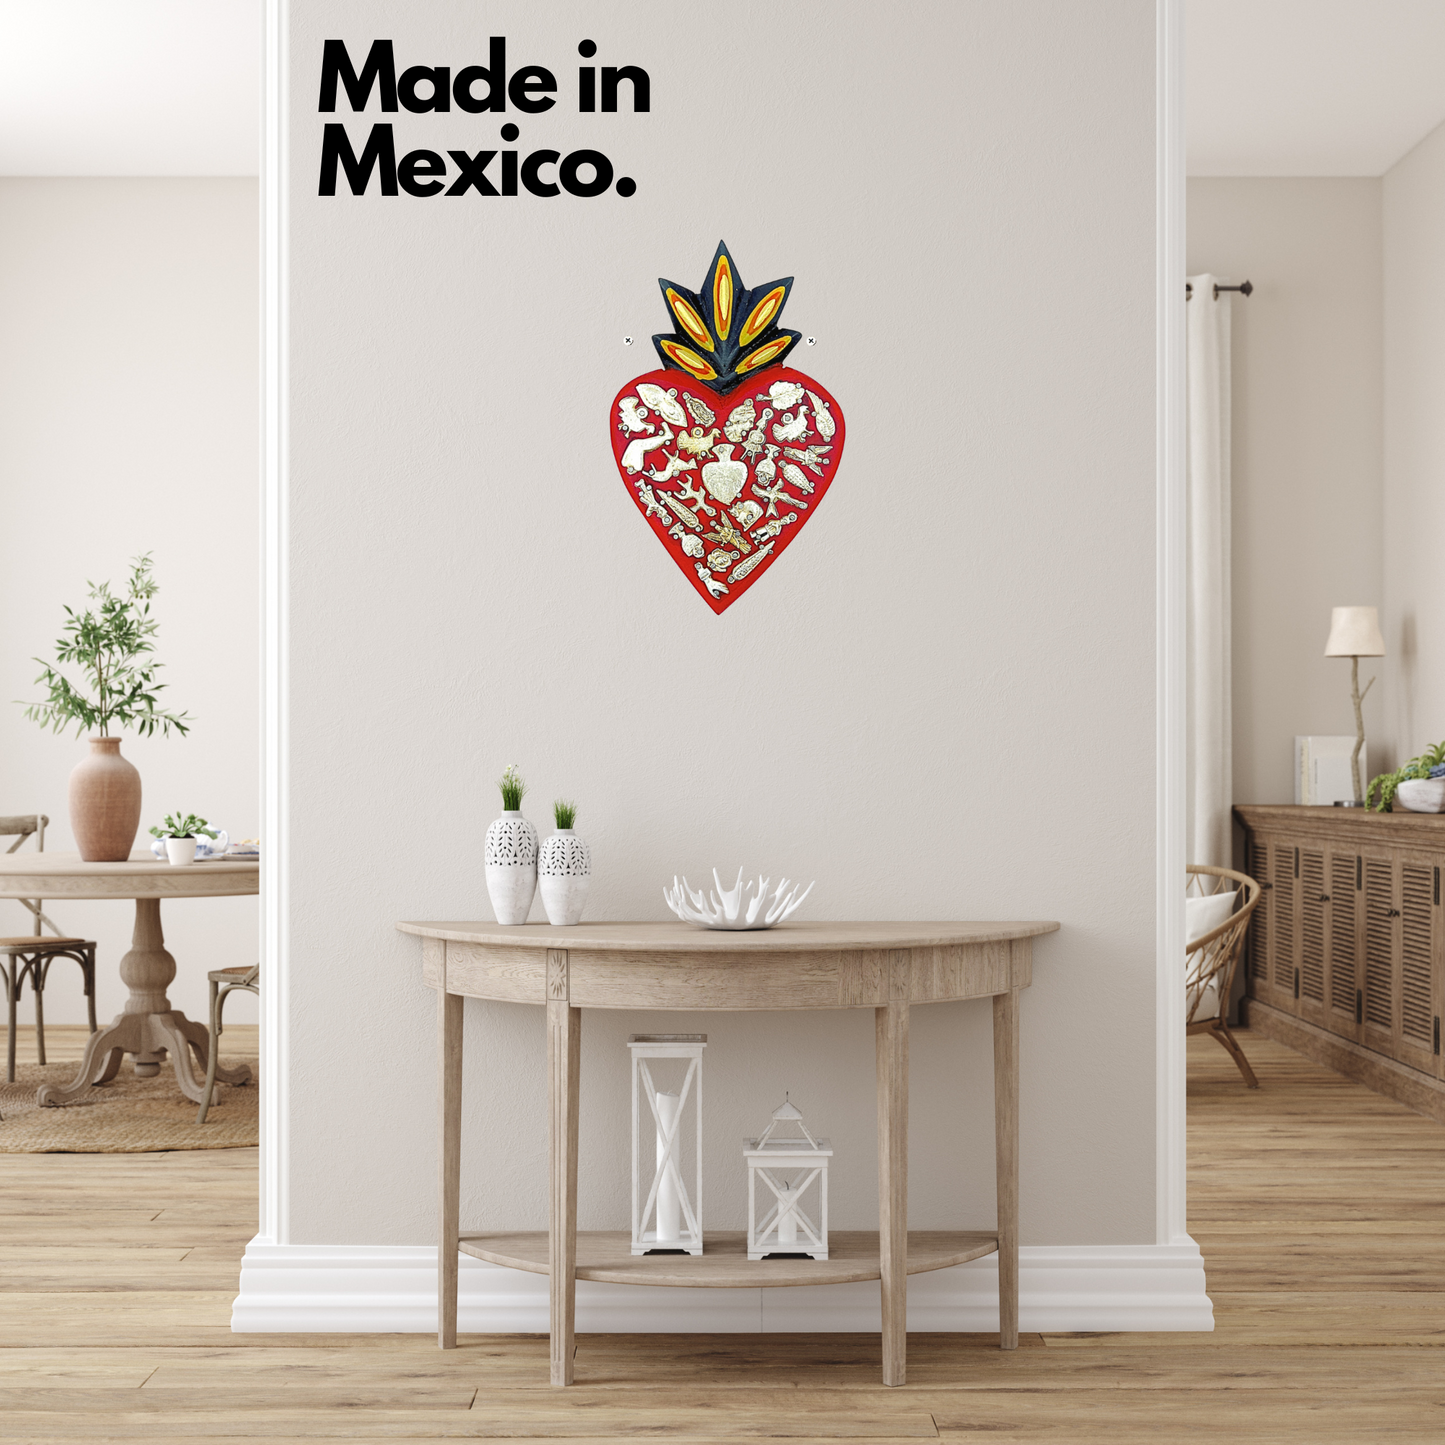 made in mexico  Casa Fiesta Designs' Ex Voto Sacred Heart - Handcrafted and Hand-painted Mexican Milagros Wall Decor.